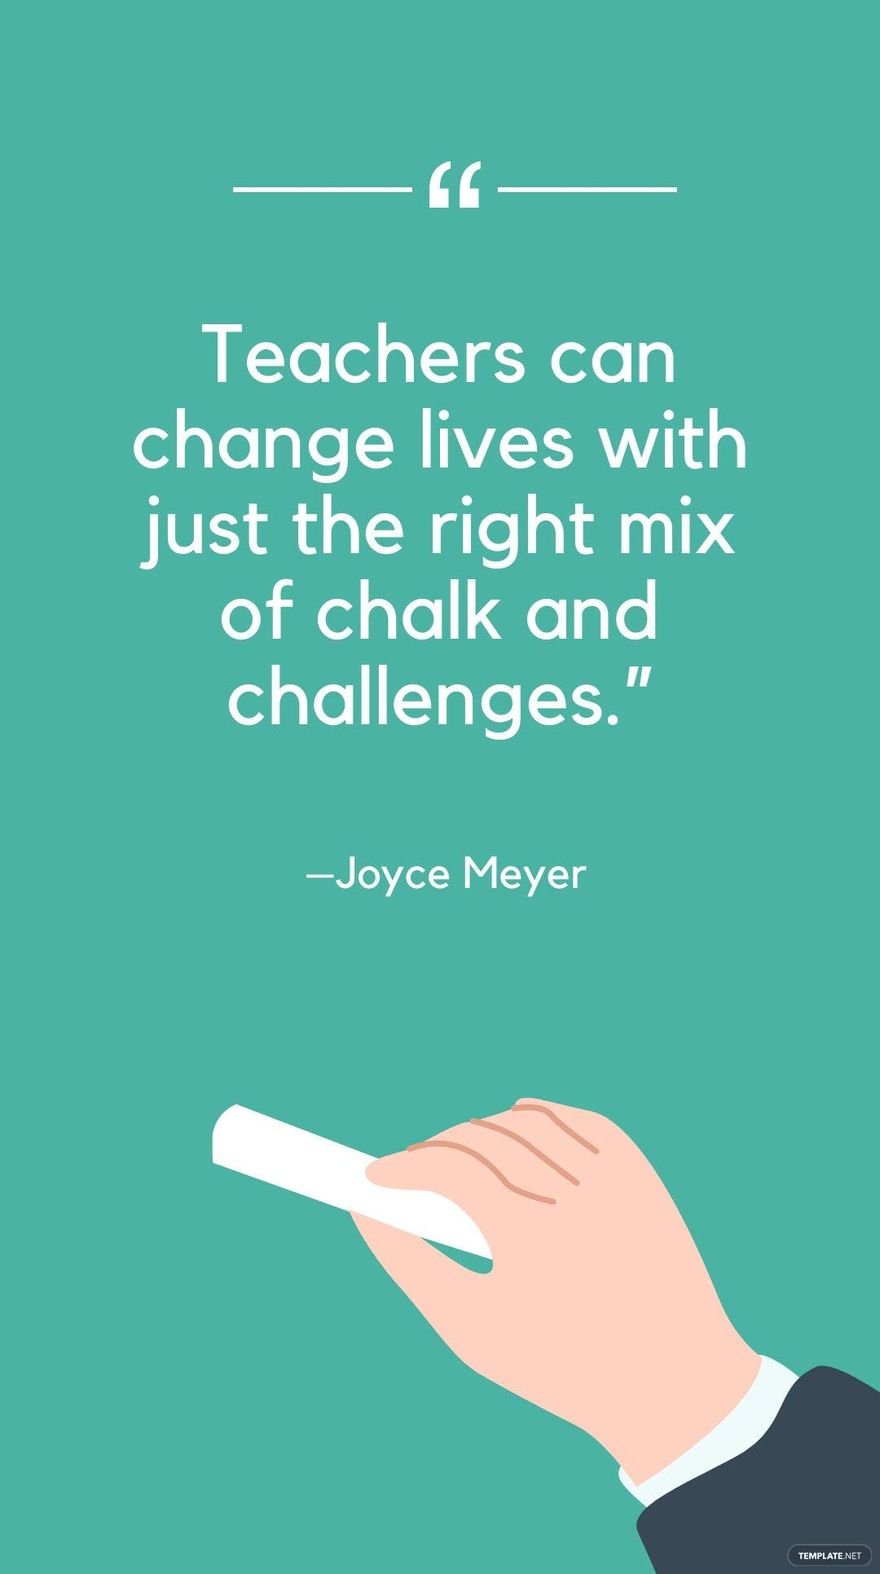 Free Joyce Meyer - Teachers can change lives with just the right mix of chalk and challenges.